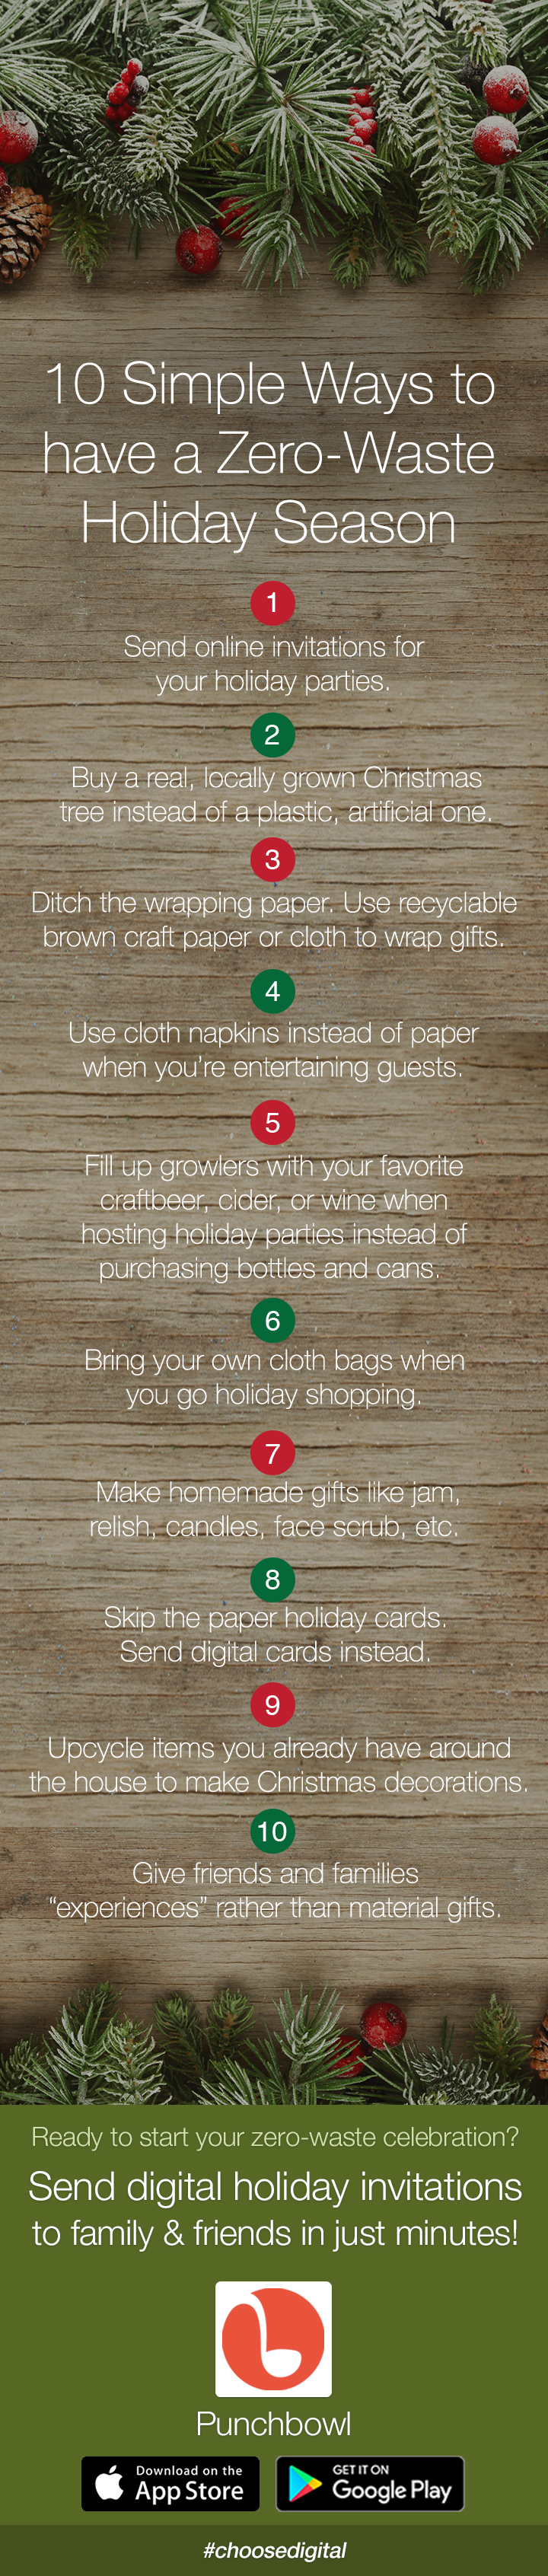 simple ways to have a zero waste holiday season infographic punchbowl